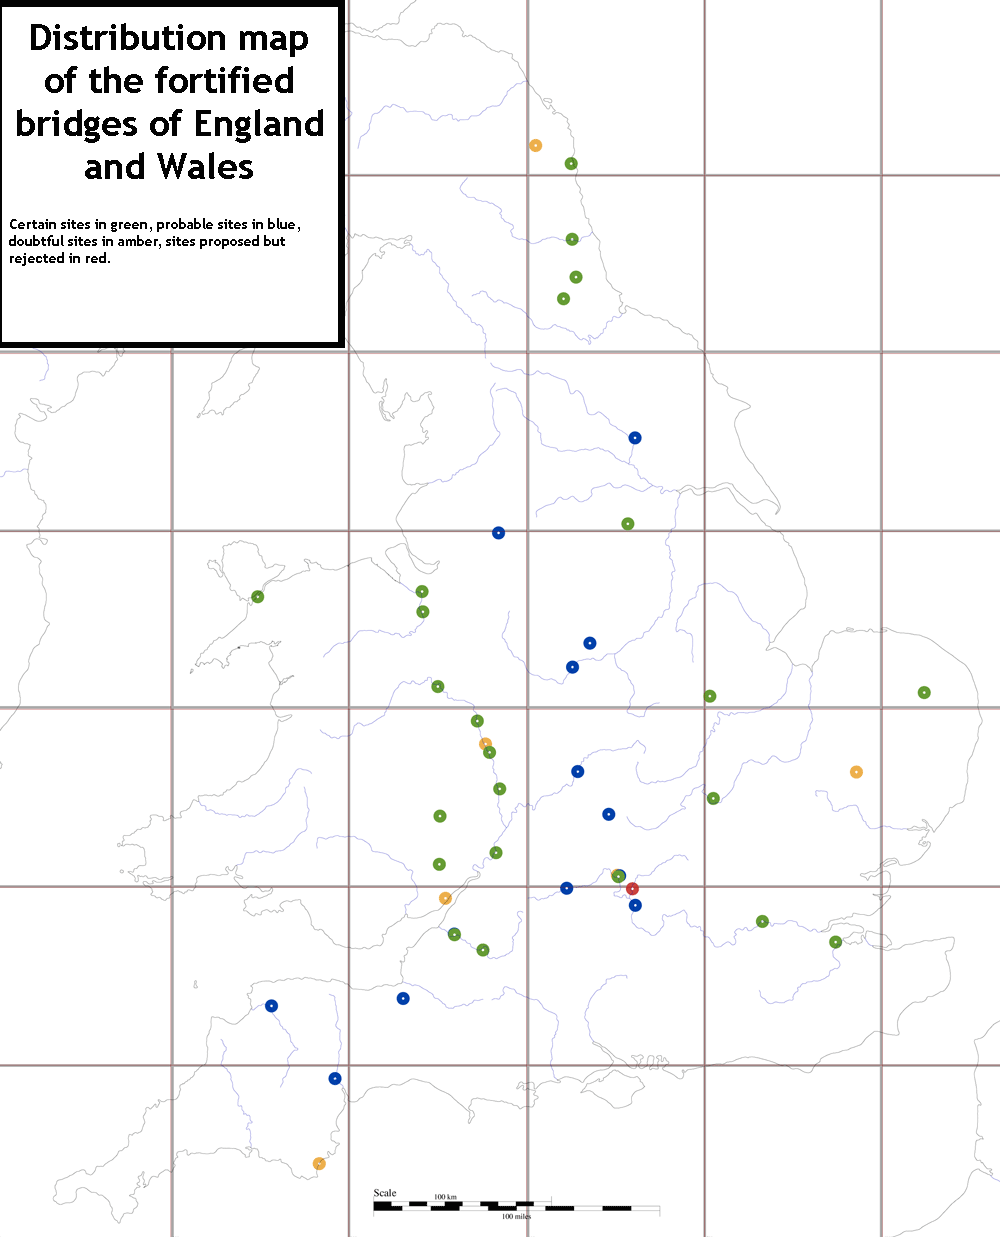 Distribution map of Fortified Bridges England